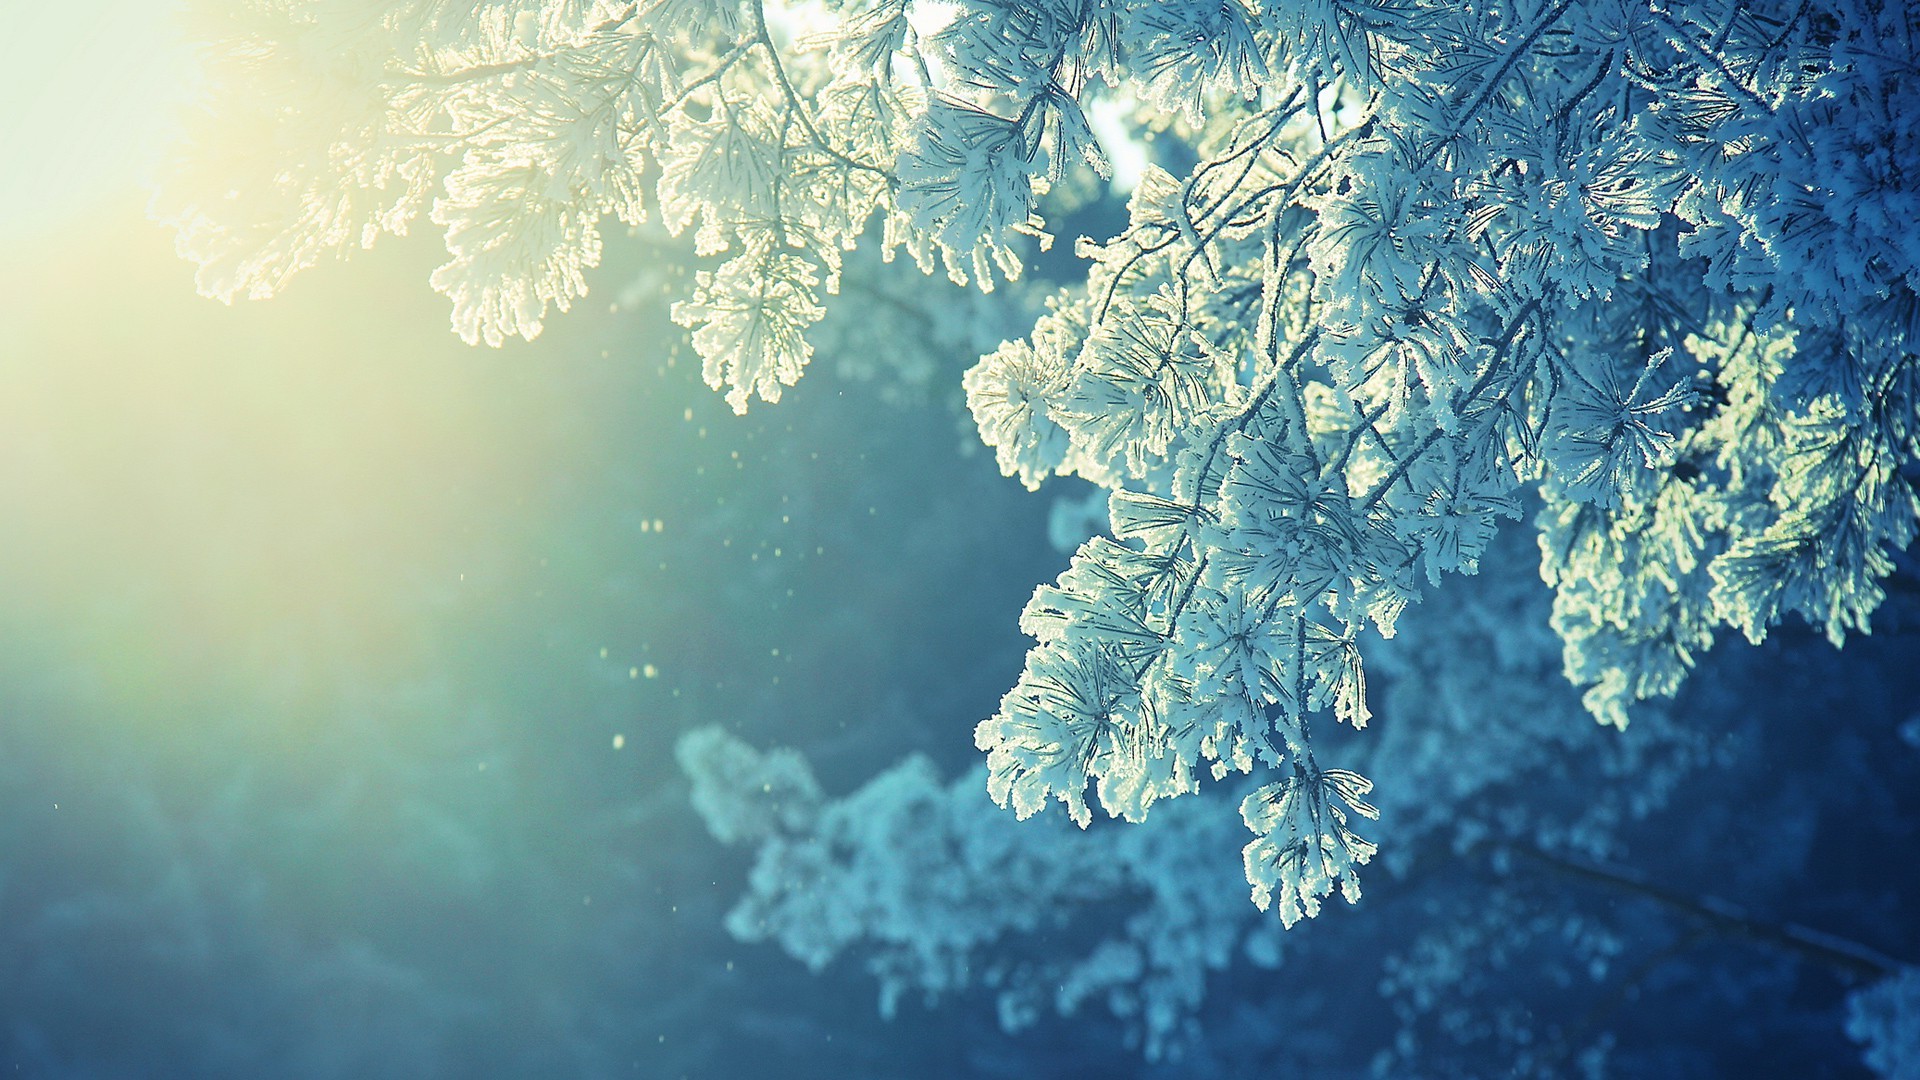 Anime Nature Snow Winter Cold Sunlight Peaceful Wallpapers